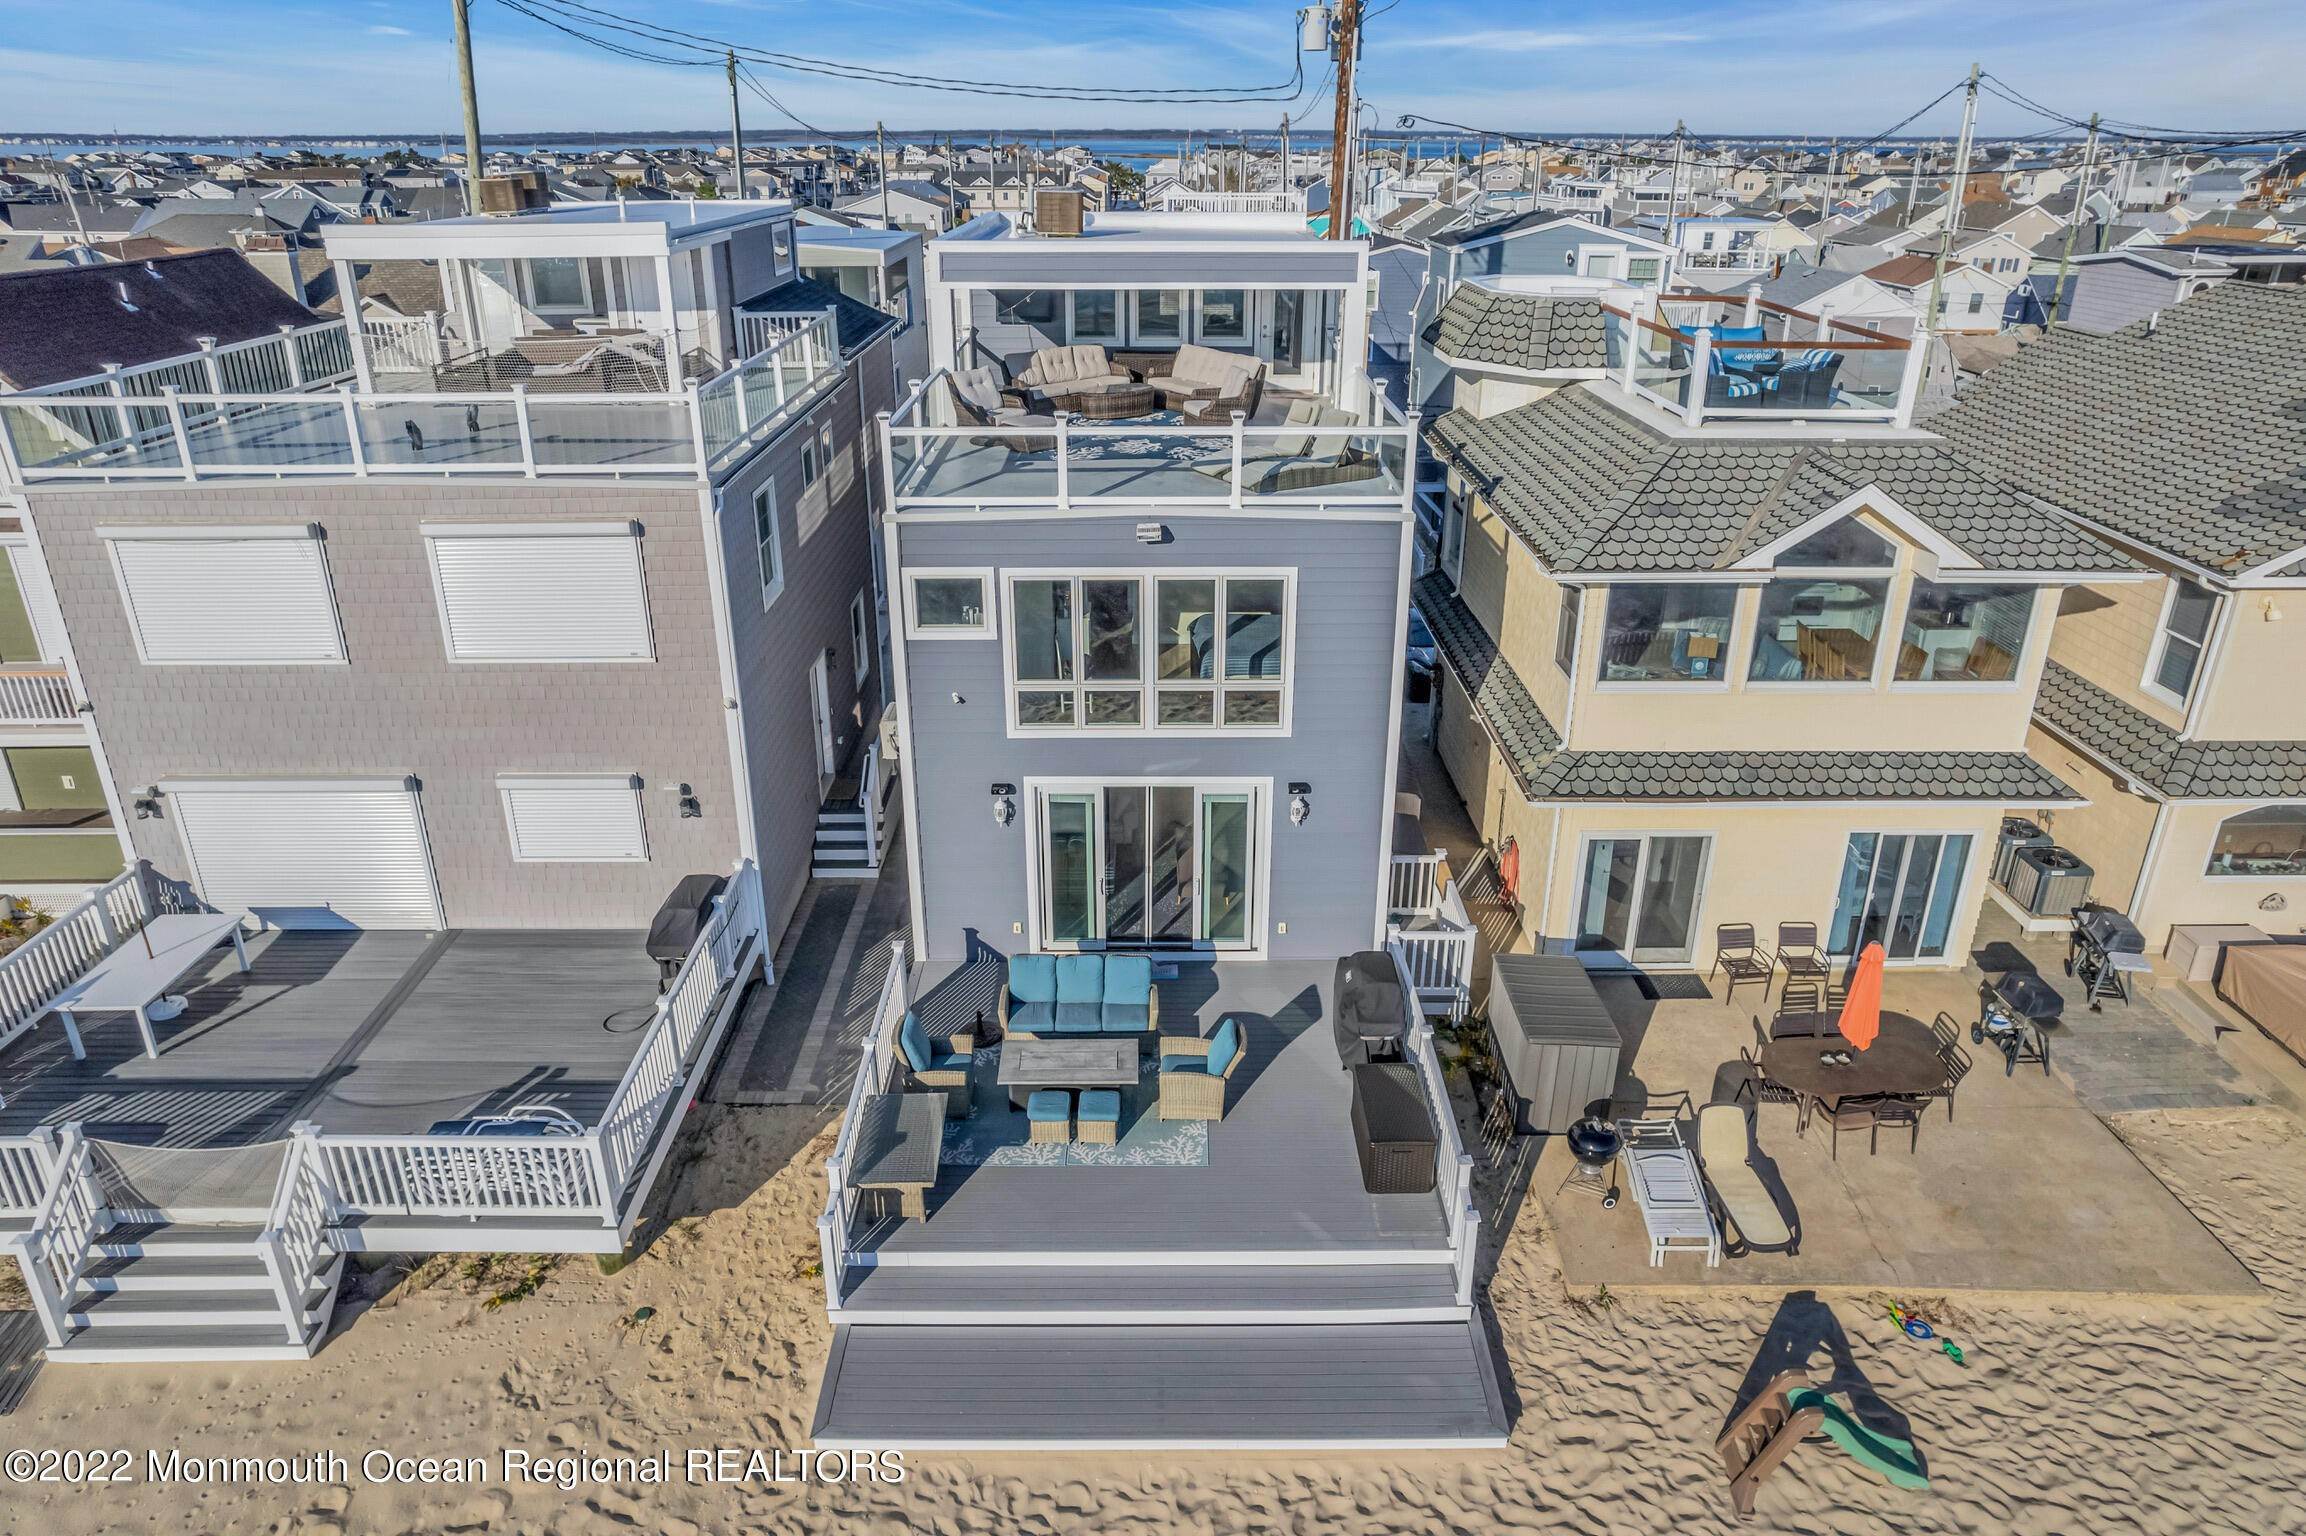 Residential Lease at 3006 Ocean Road SUMMER RENTAL Lavallette, New Jersey 08735 United States